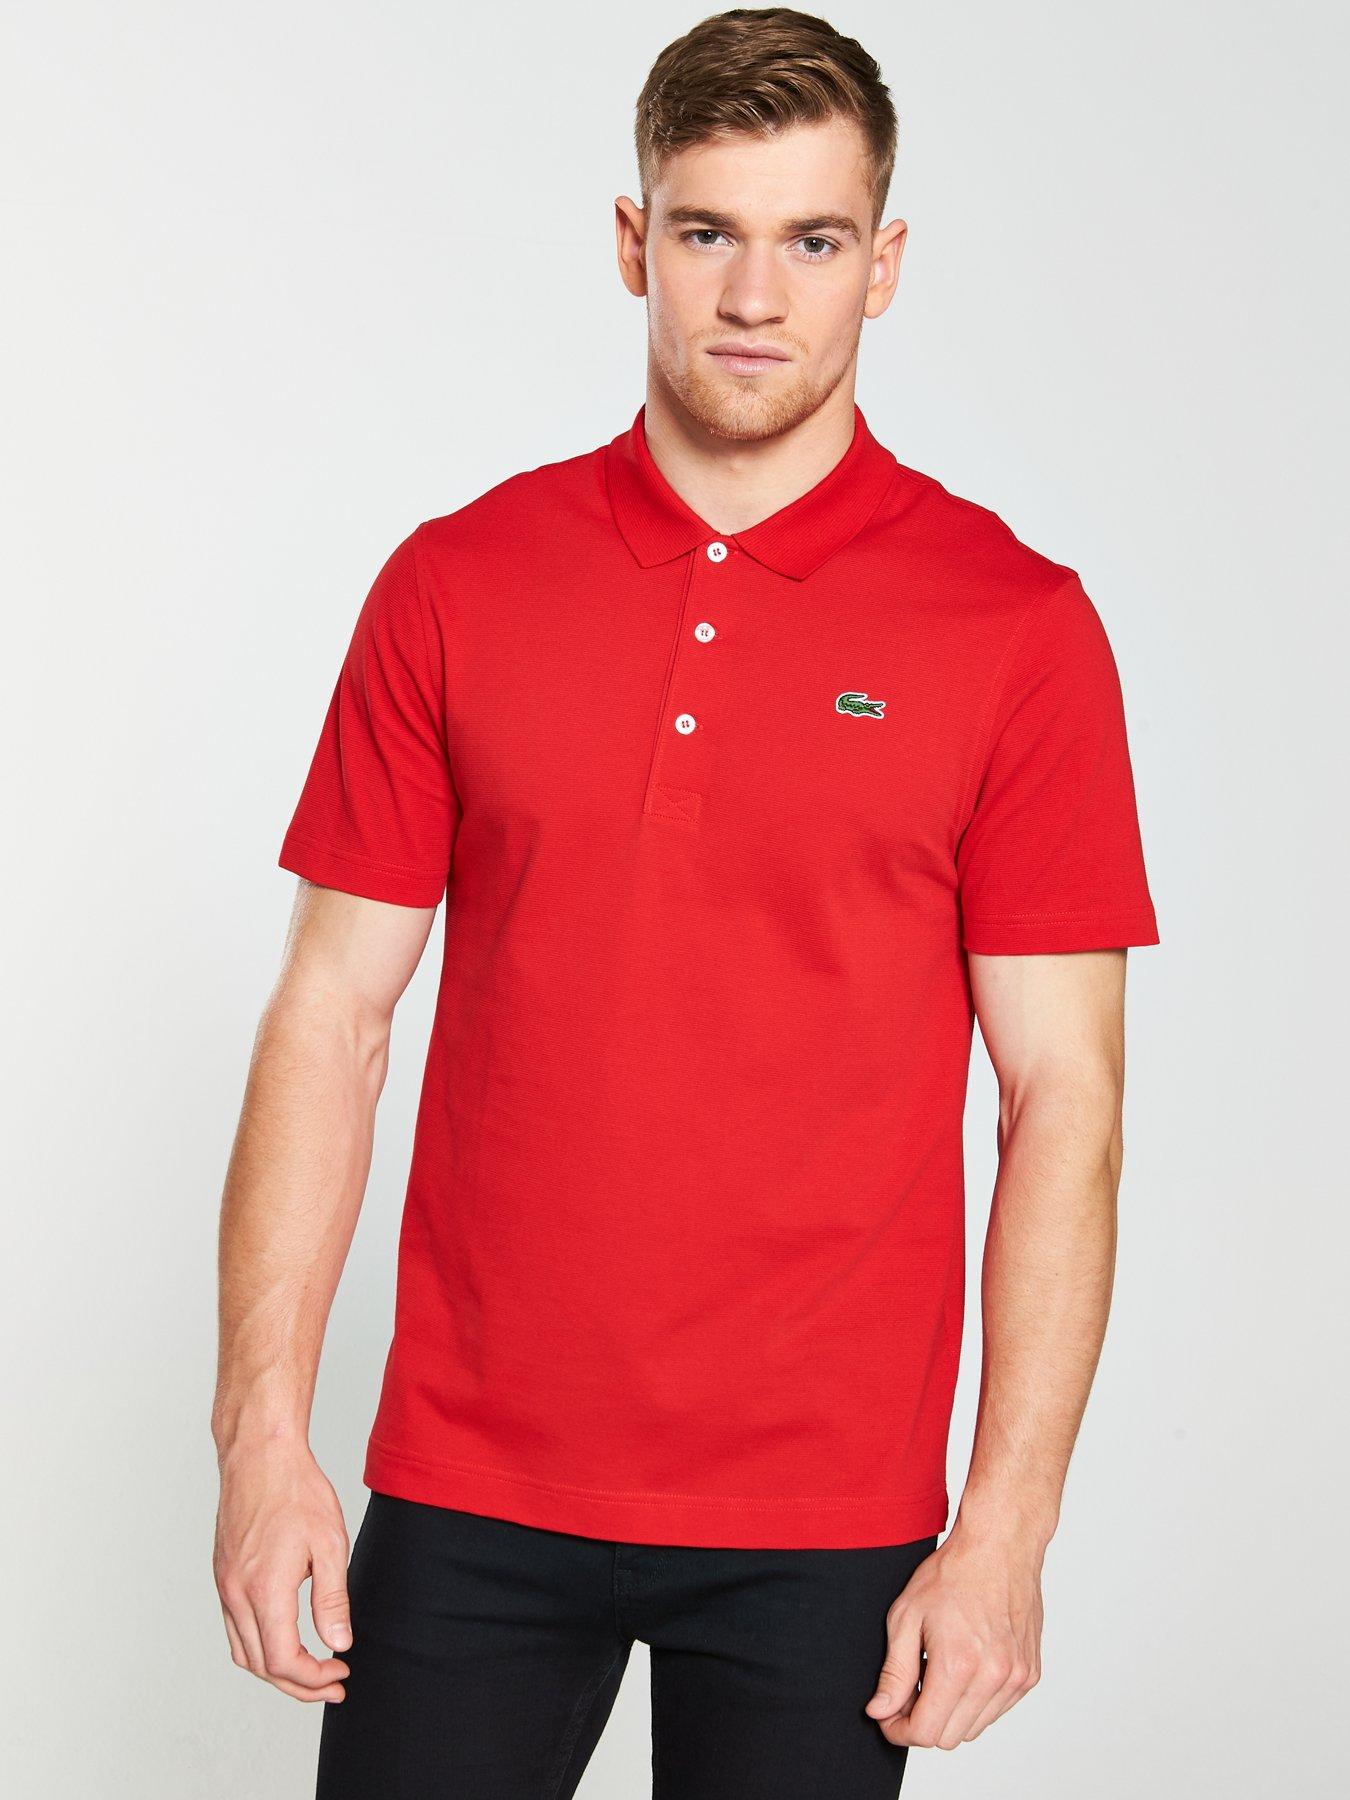 lacoste shirt red